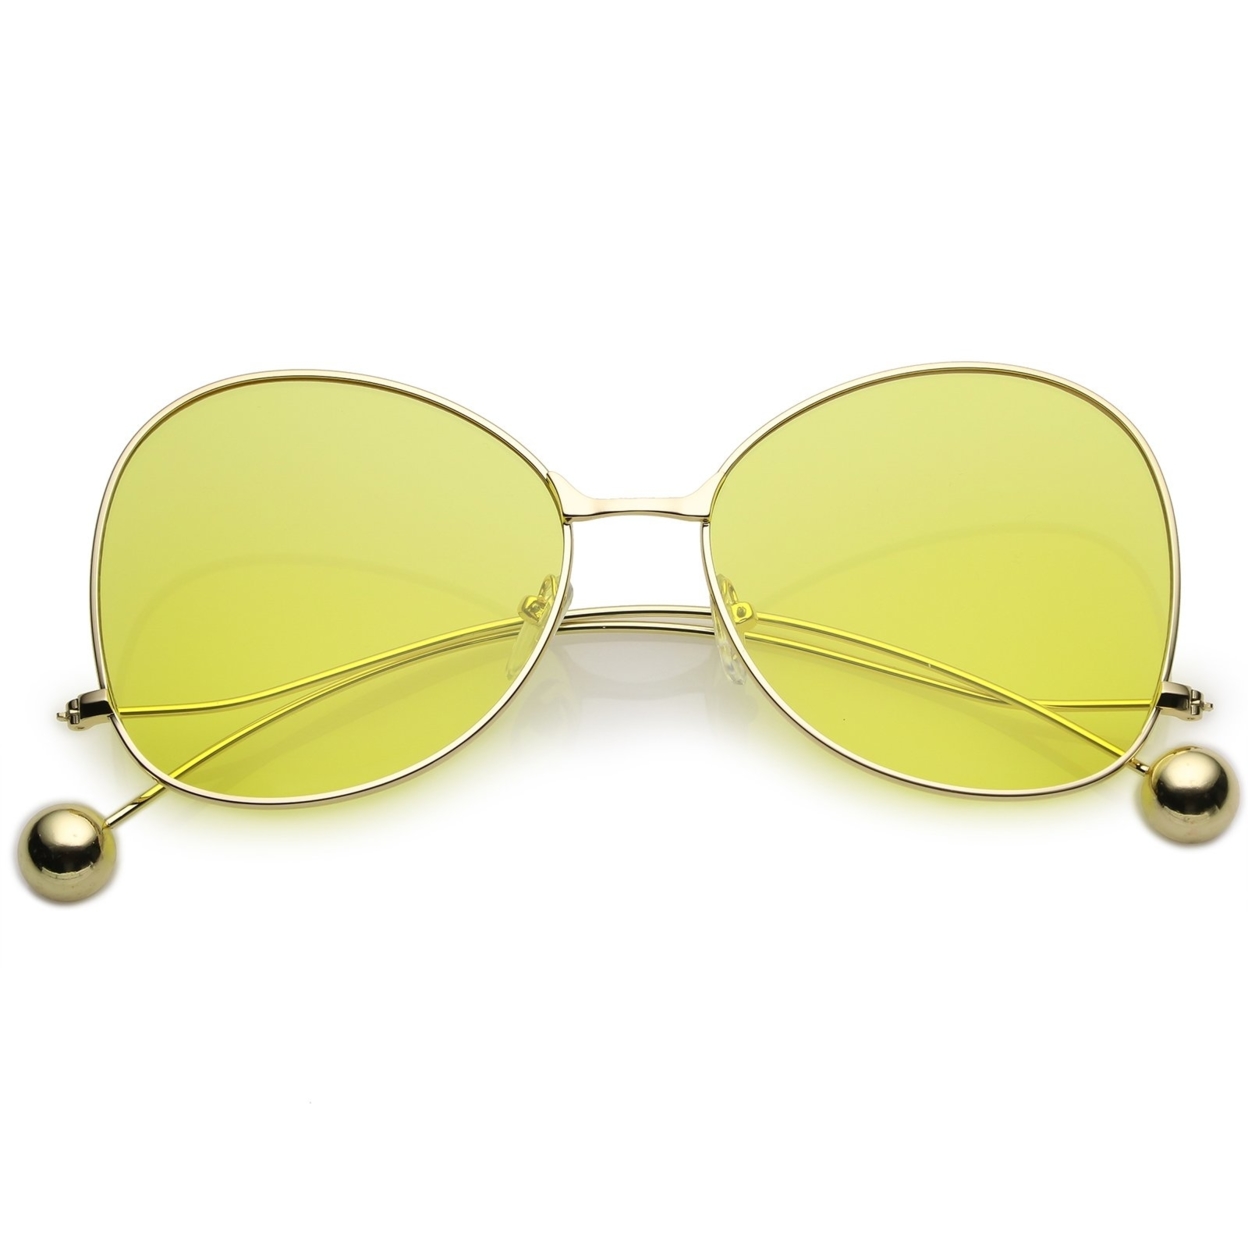 Women's Metal Butterfly Sunglasses Thin Curved Arms Ball Accent Color Tinted Flat Lens 56mm - Gold / Green